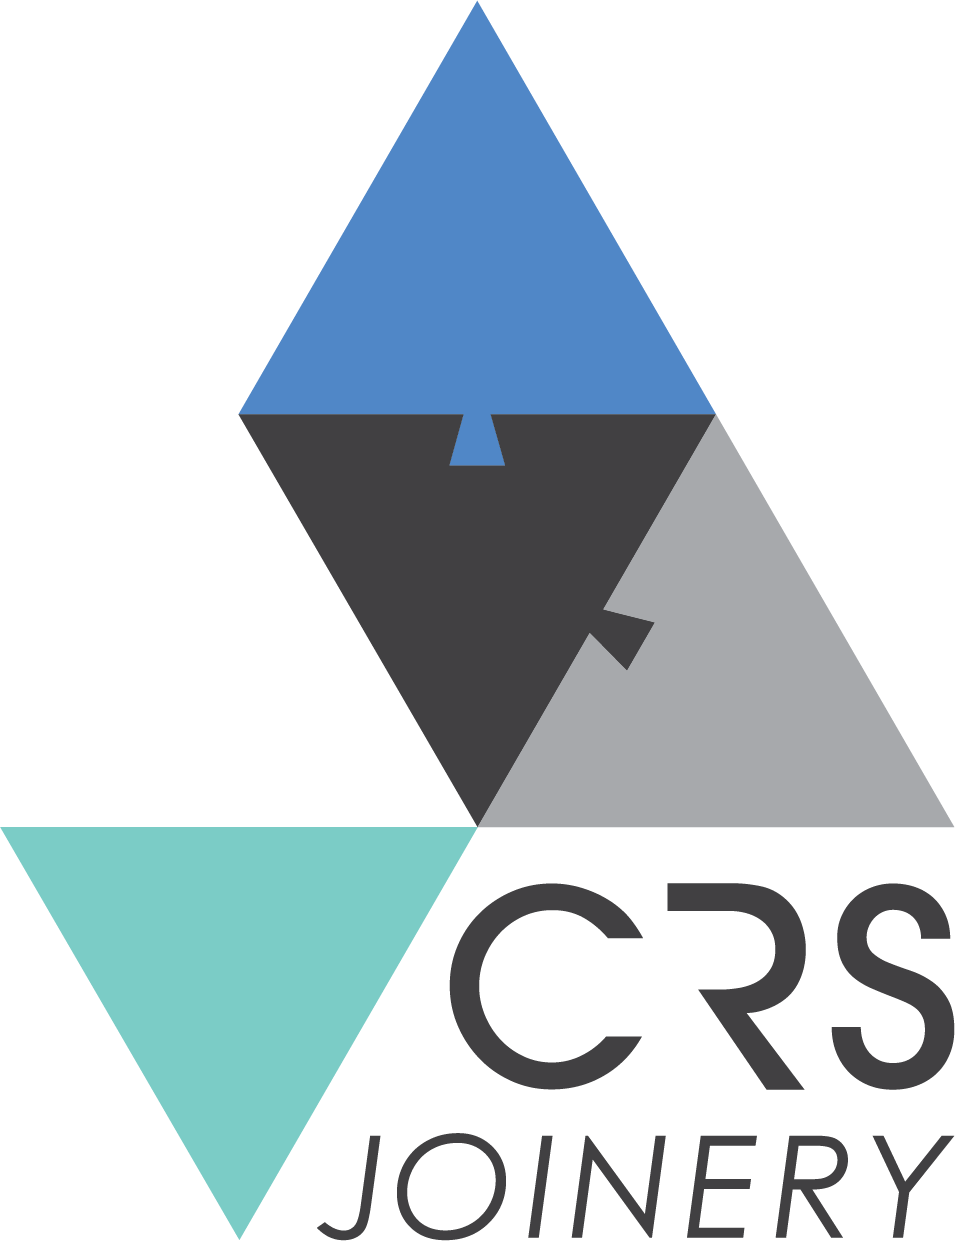 CRS Joinery